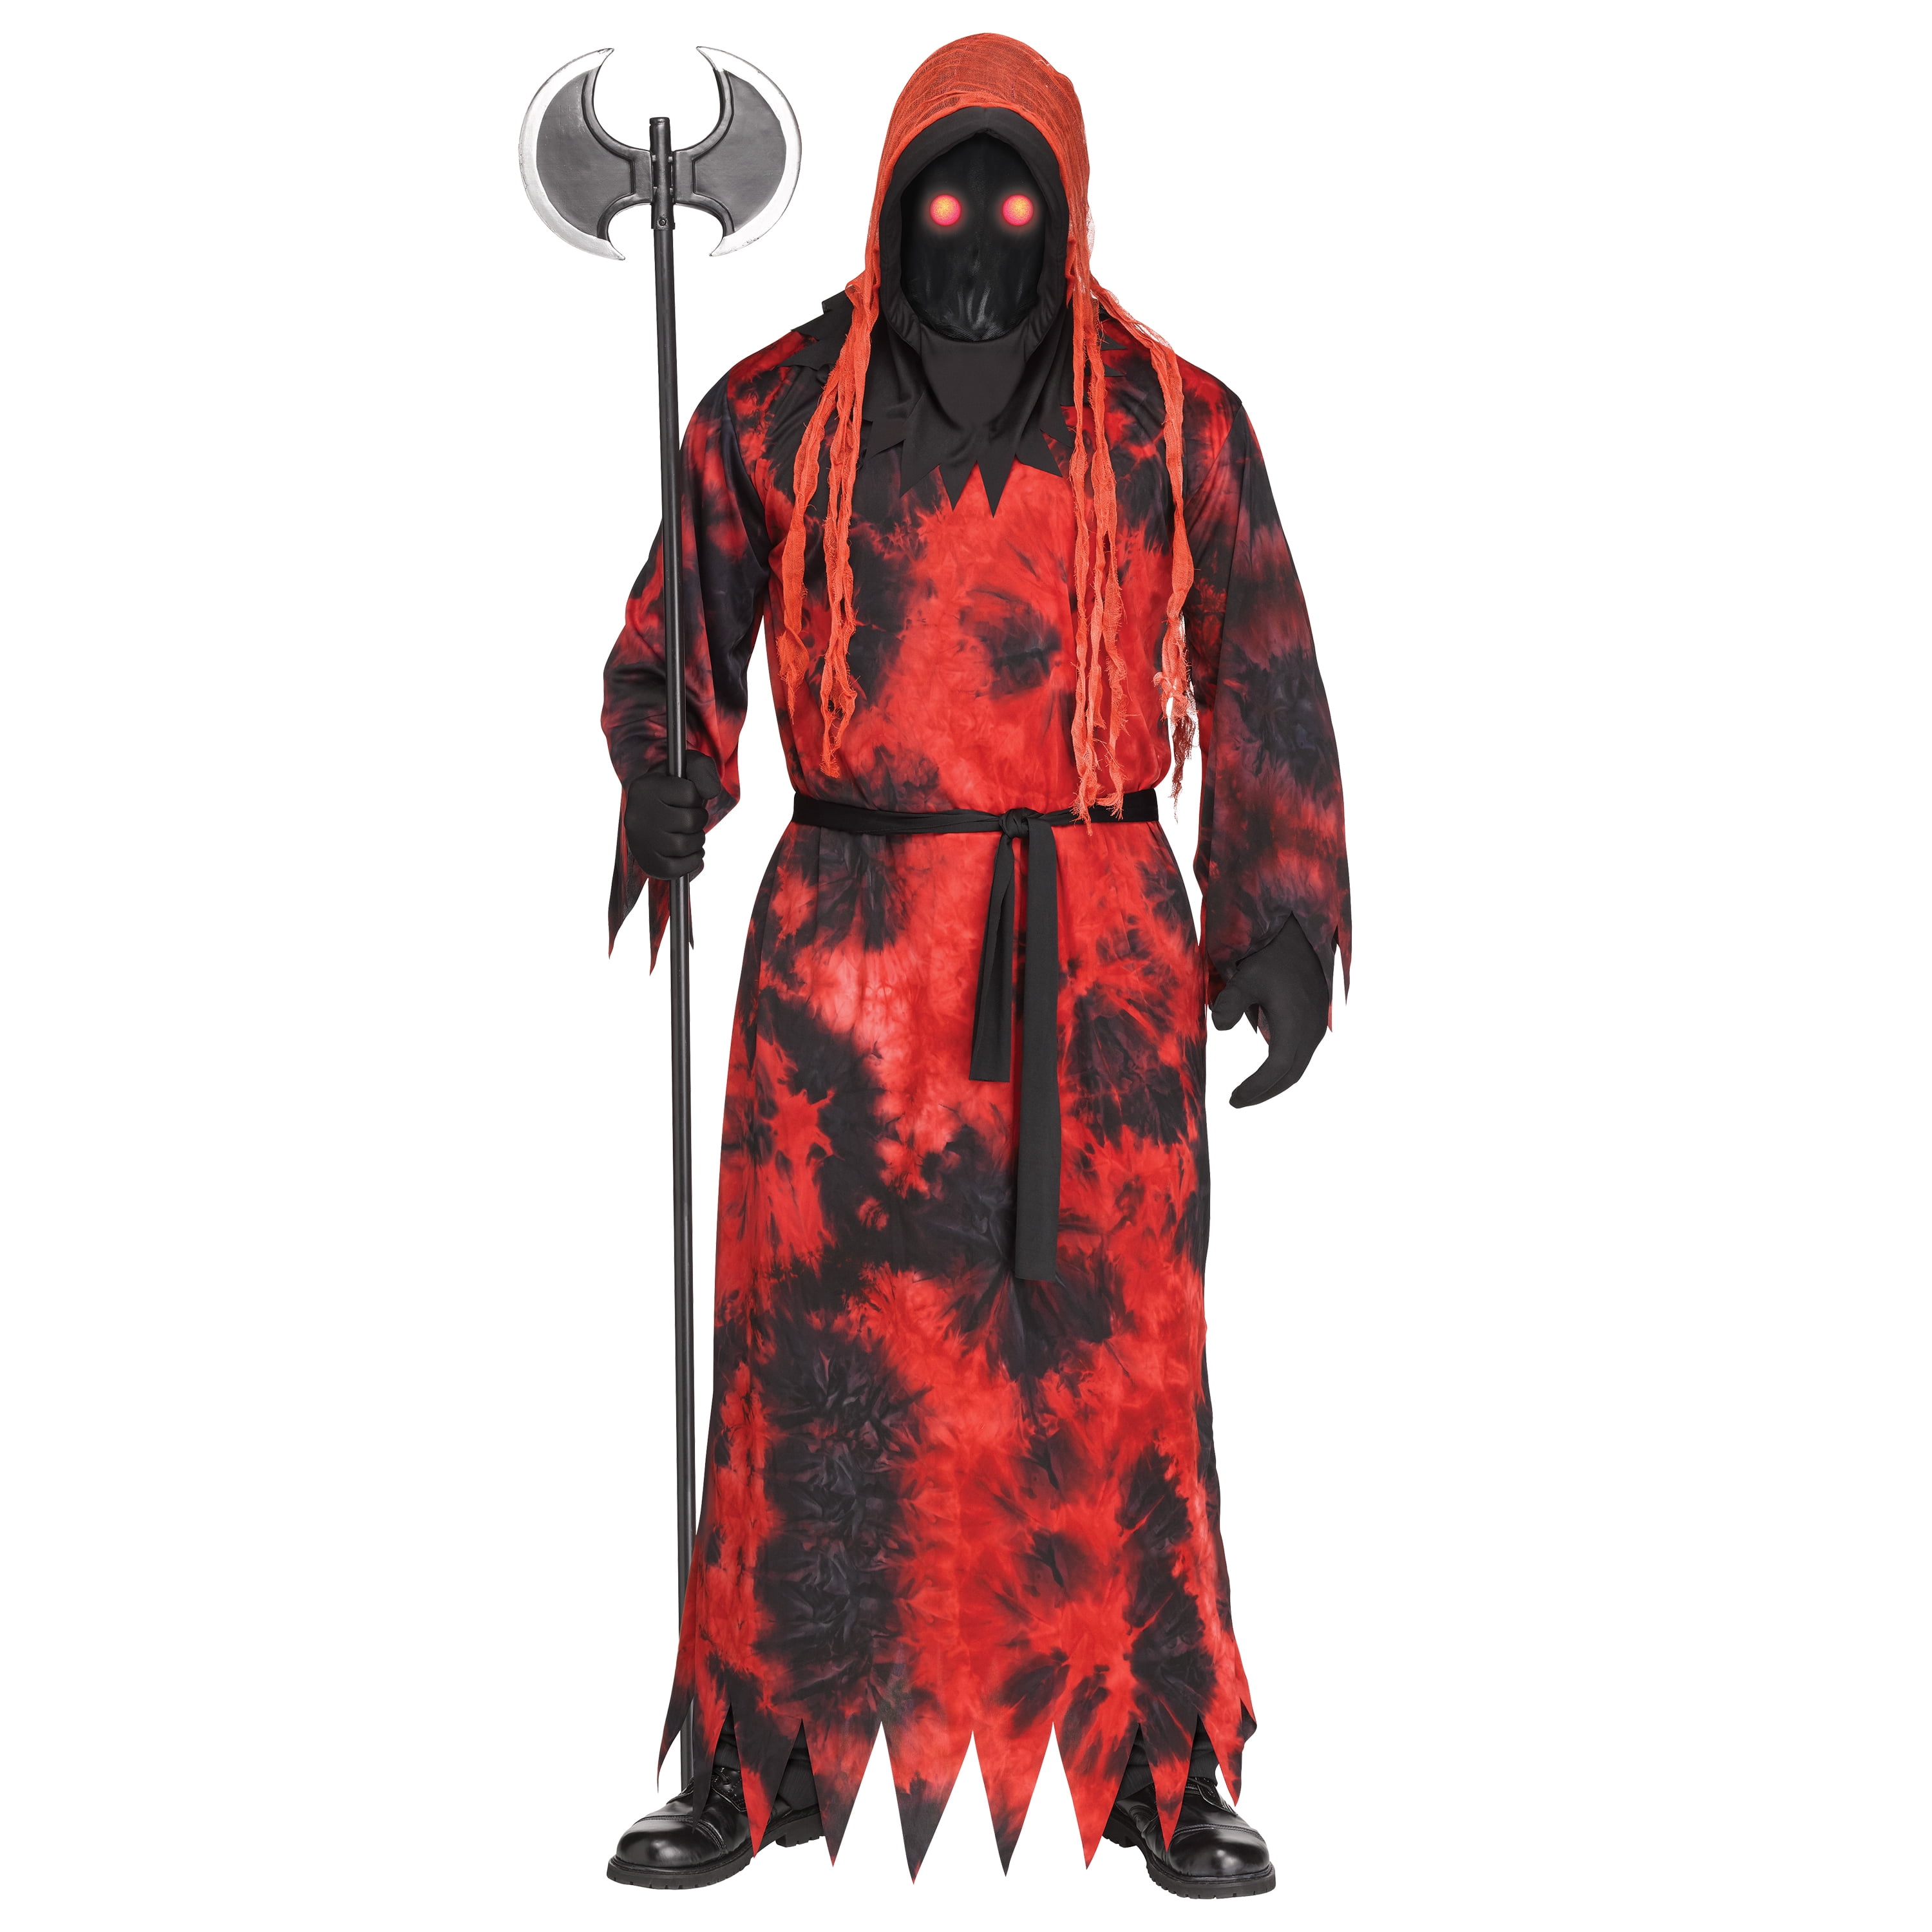 Fun World Inc. Fading Eyes Light up Executioner Halloween Scary Costume Male, Adult 18-64, Black